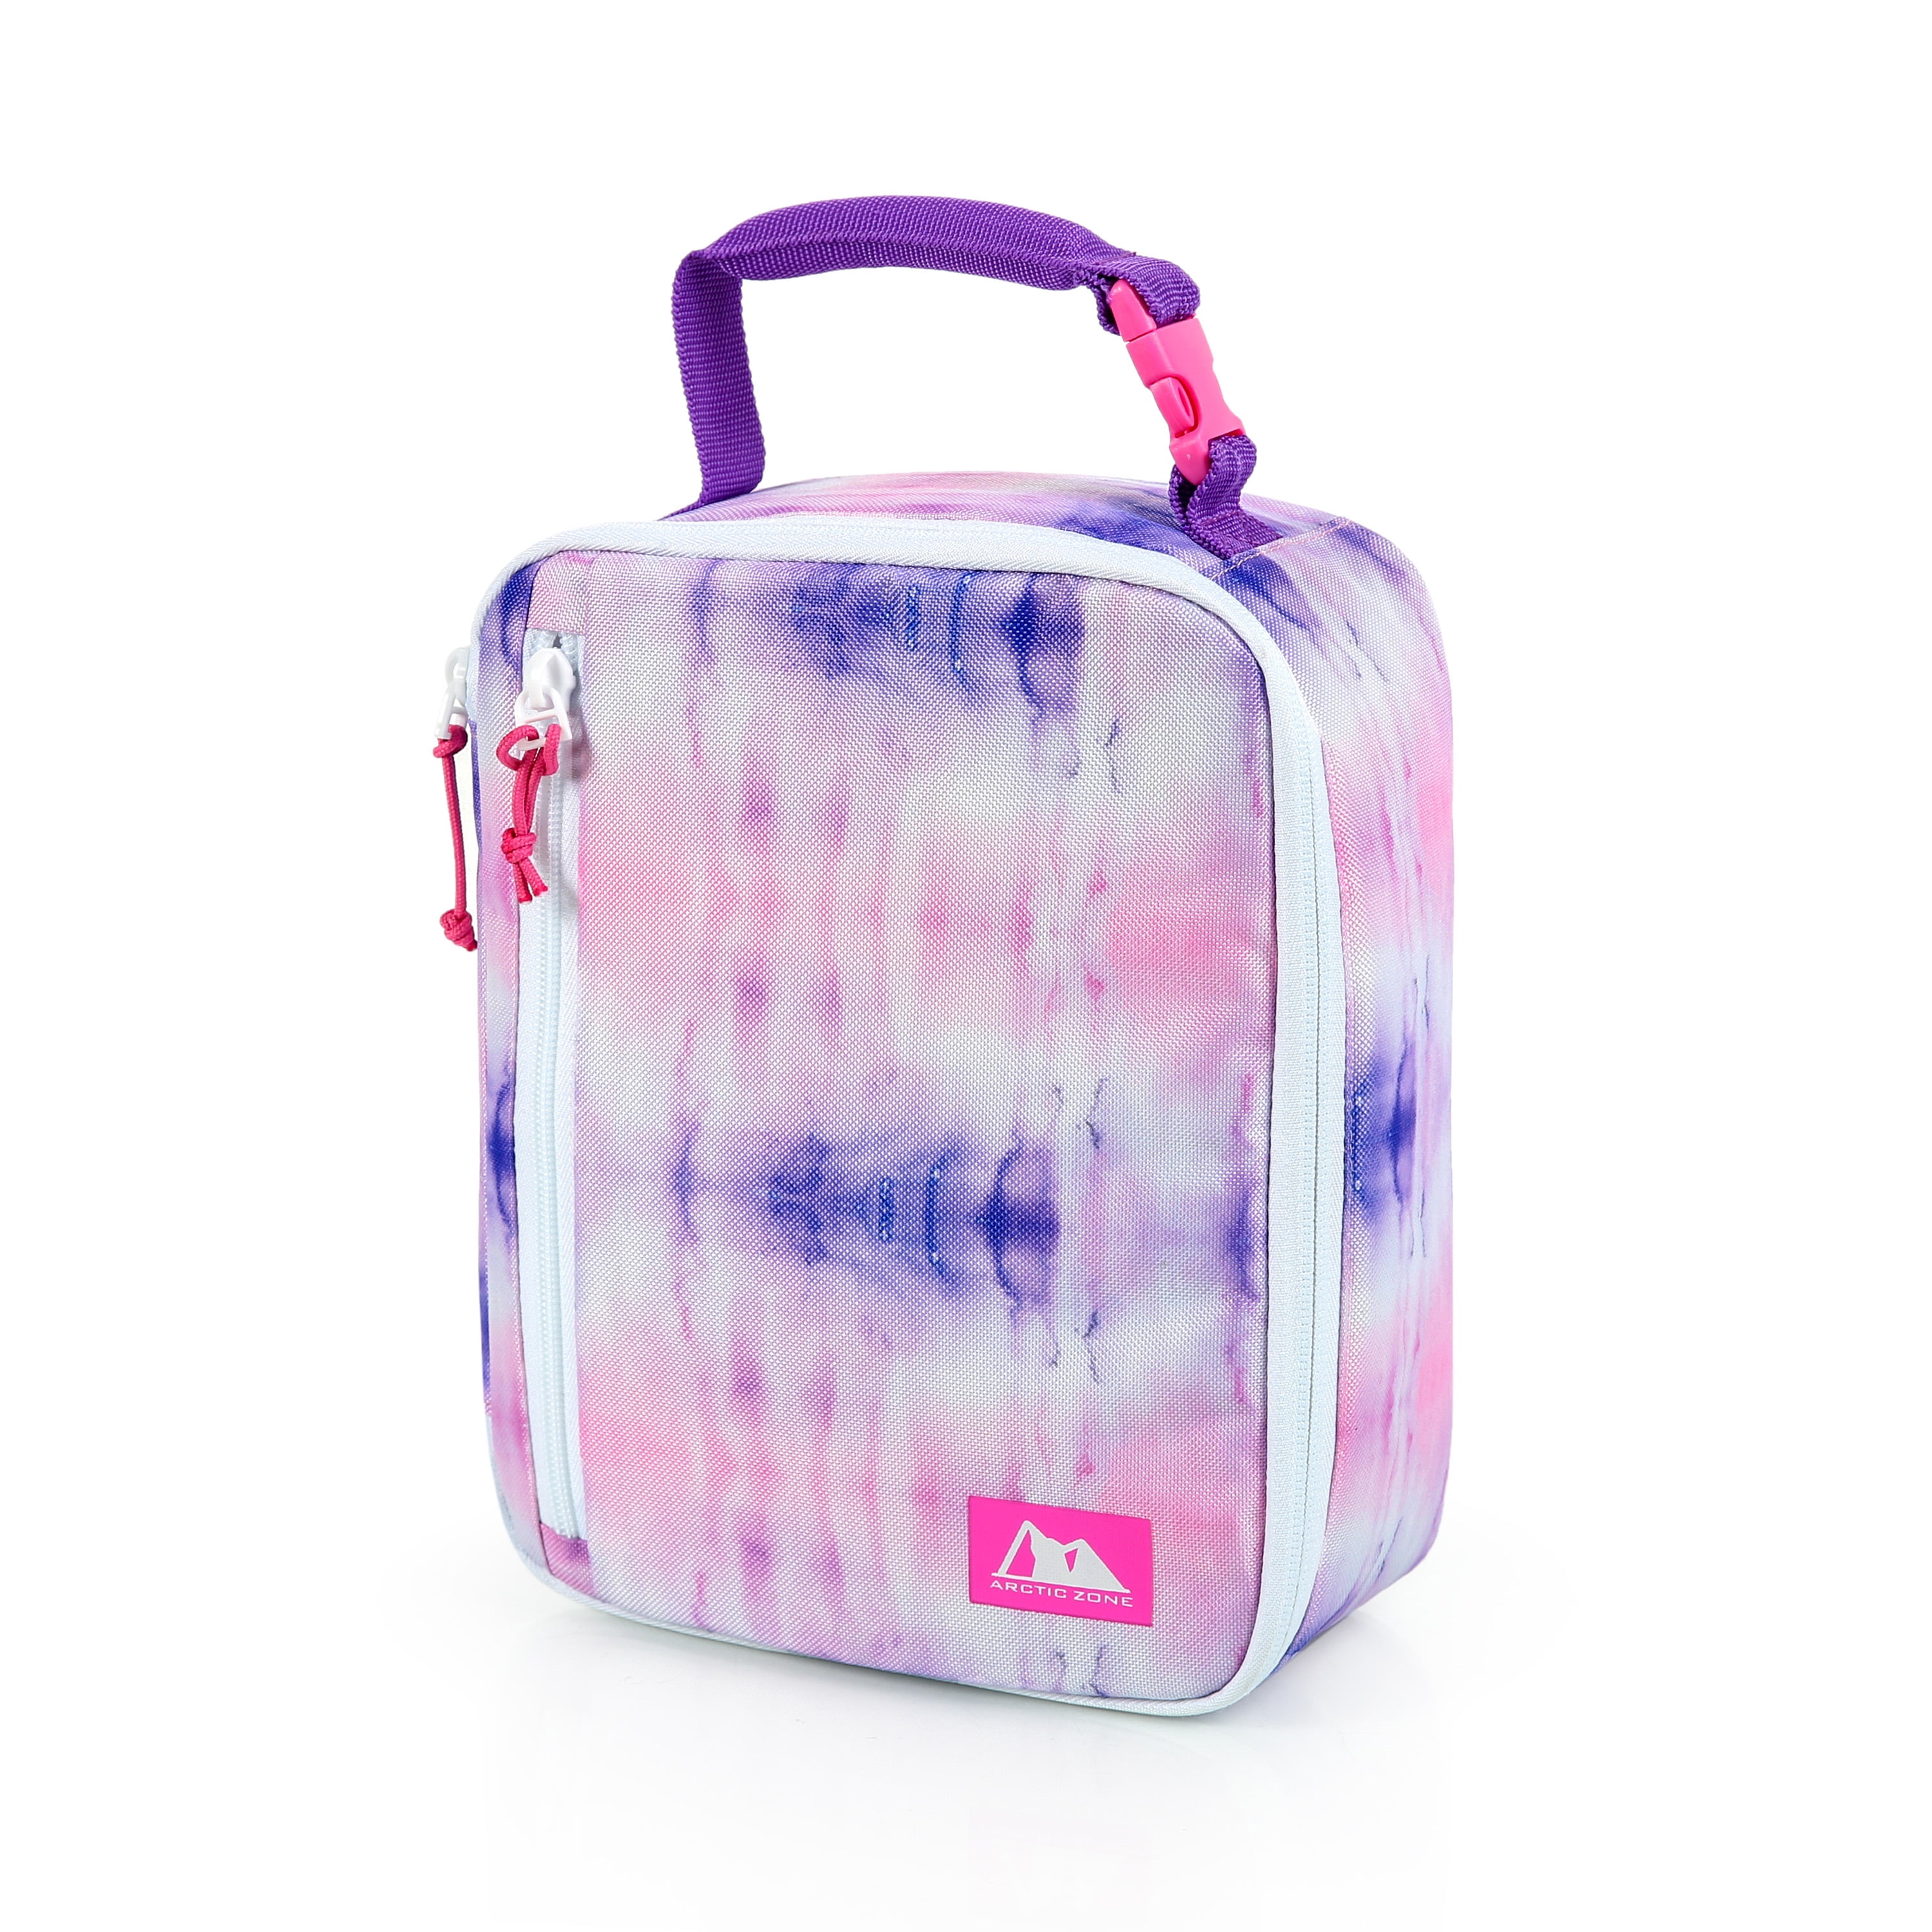 Arctic Zone Lunch Box Combo with Thermal Insulation, Pink 